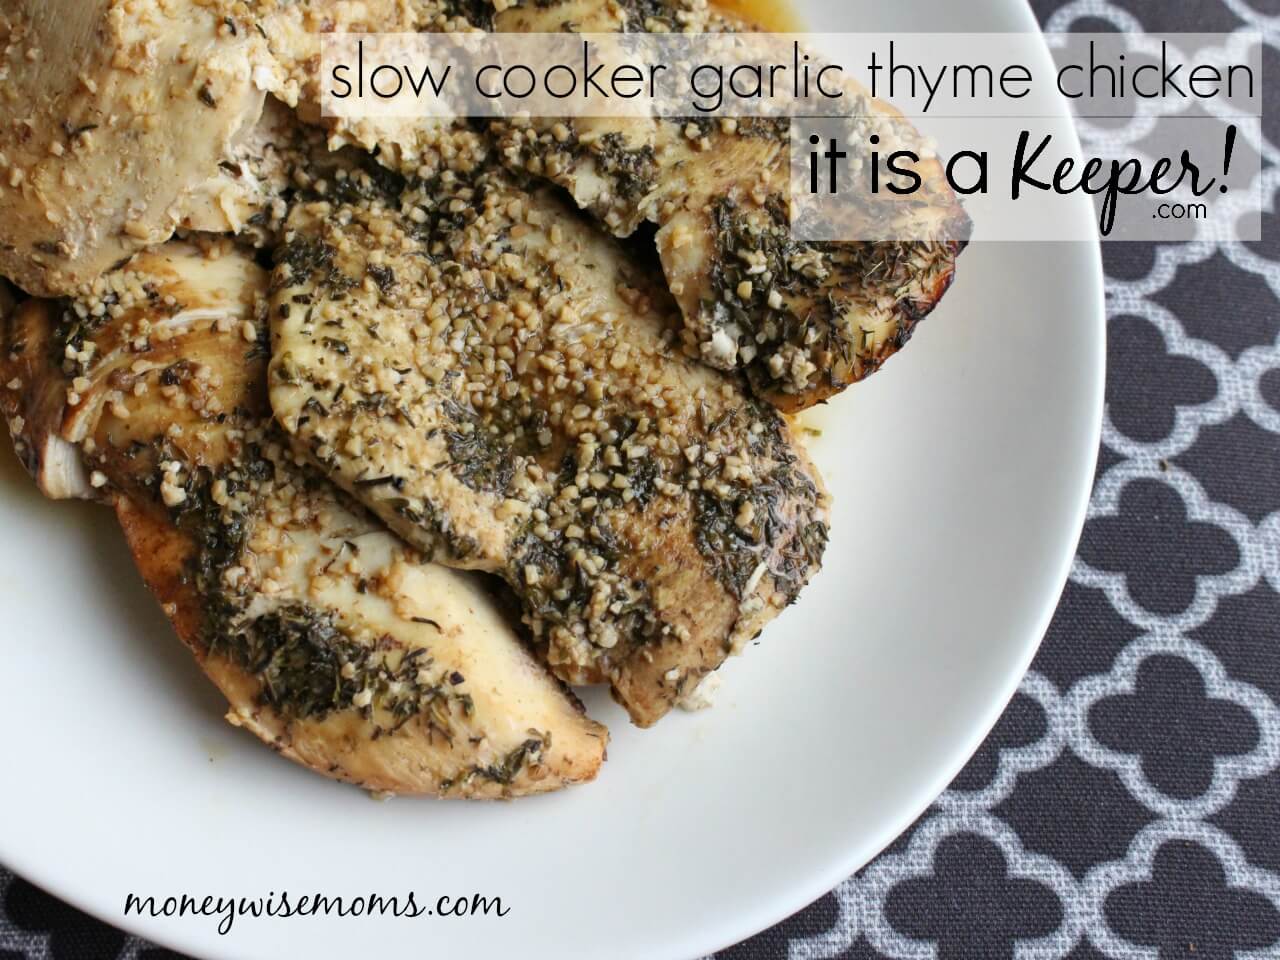 Slow Cooker Garlic Thyme Chicken - this flavorful chicken dish will quickly become one of your favorite easy crock pot recipes for chicken